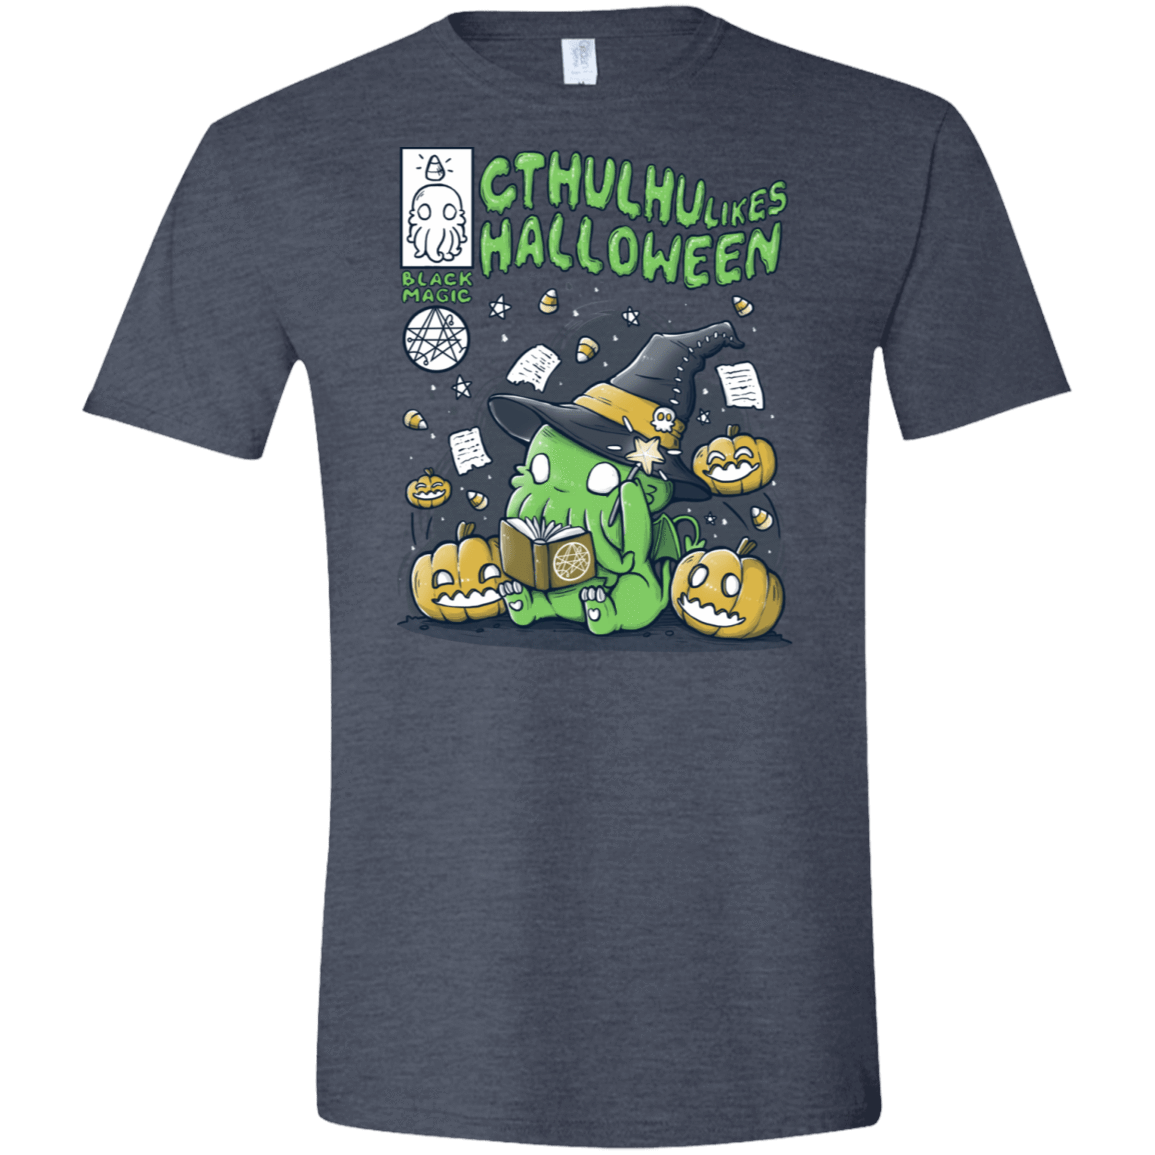 T-Shirts Heather Navy / S Cthulhu Likes Halloween Men's Semi-Fitted Softstyle